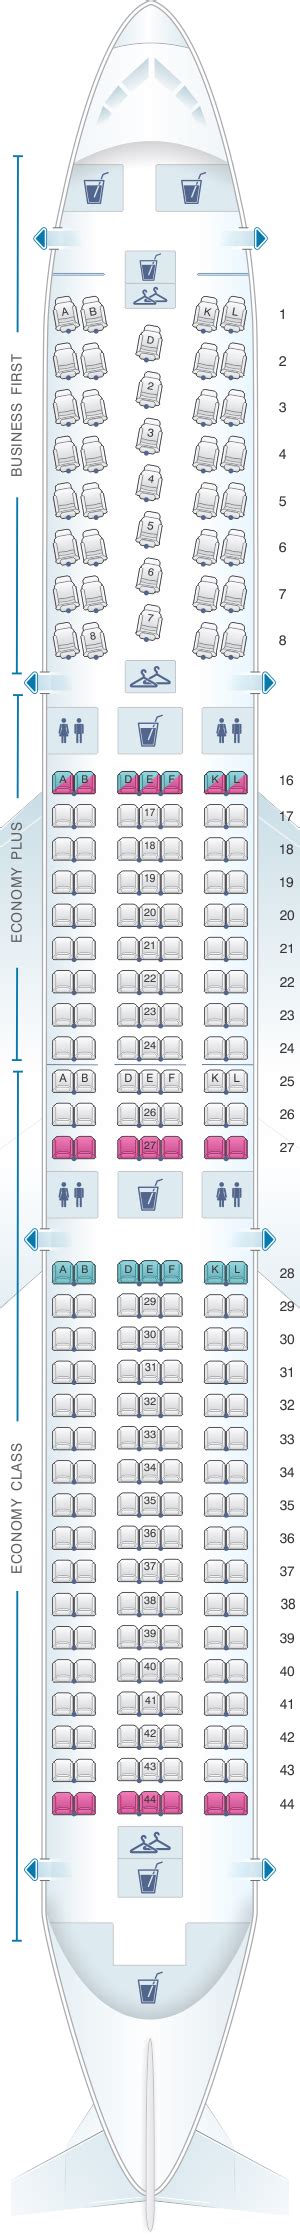 Seat Map United Airlines Boeing B767 400er 764